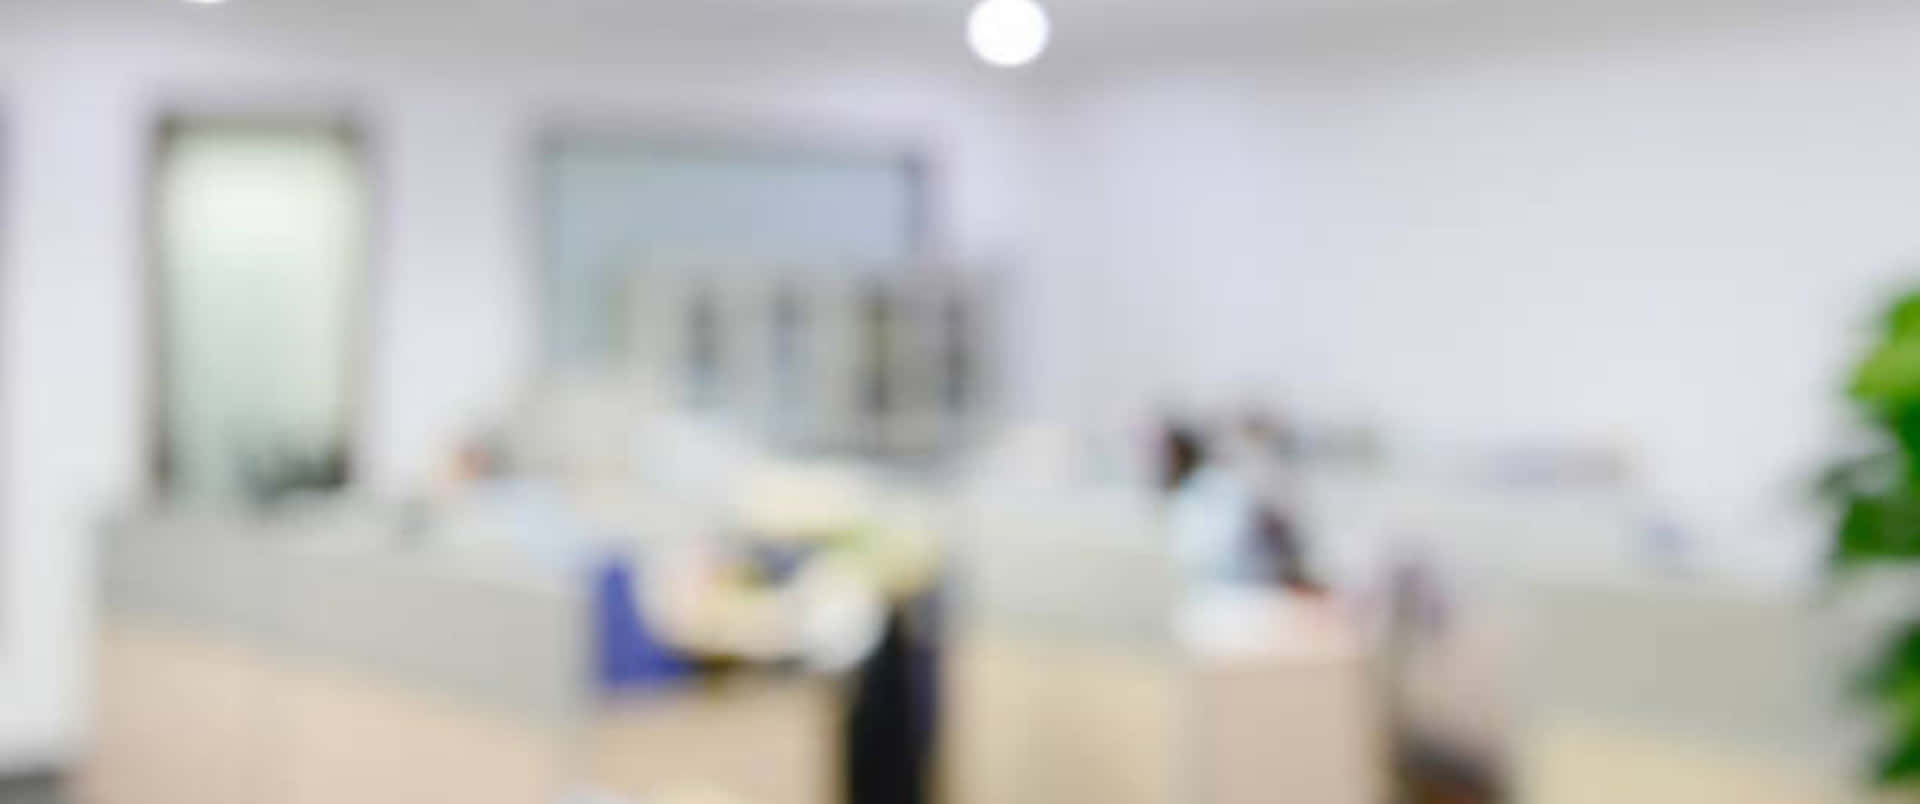 Blurry Image Of An Office With People In It